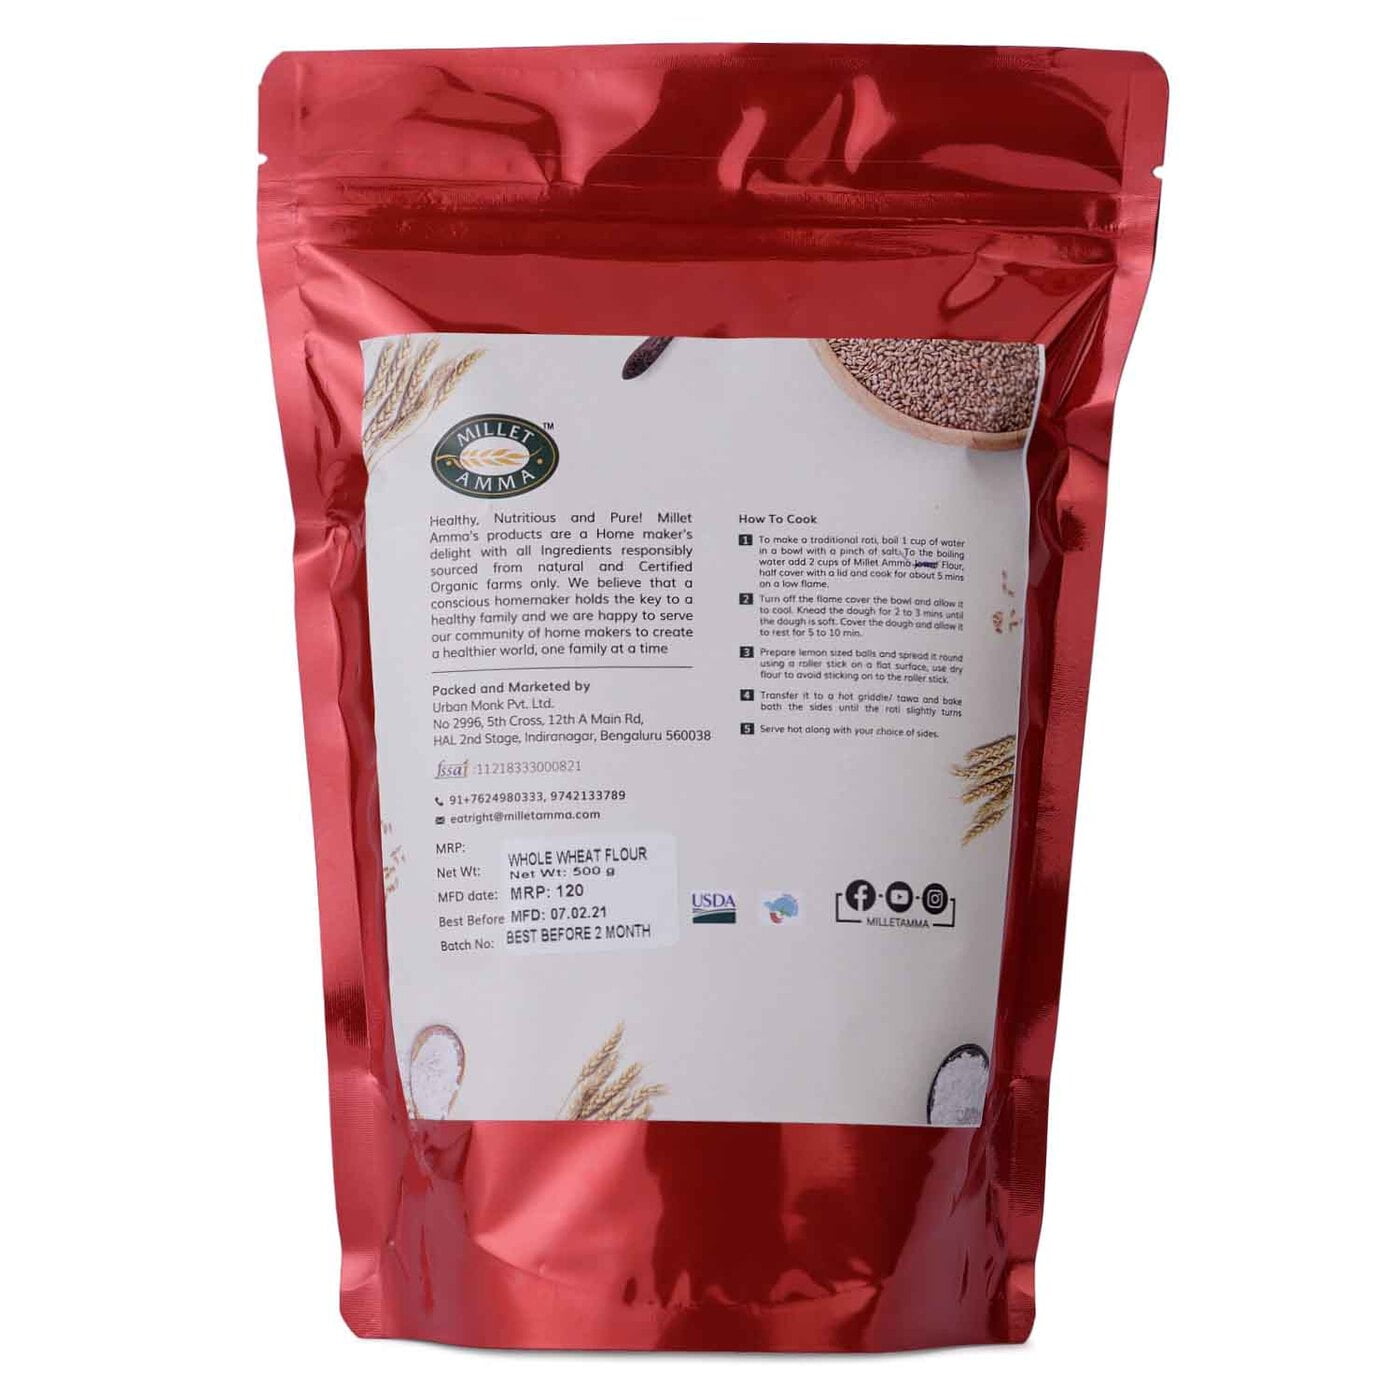 Milletamma’s Quinoa flour is an excellent source of carbohydrates, manganese fibre, phosphorous, iron, and magnesium.  It helps in strengthening the bones.  It’s also naturally gluten-free and an excellent source of protein  It helps in proper brain functioning and metabolism.